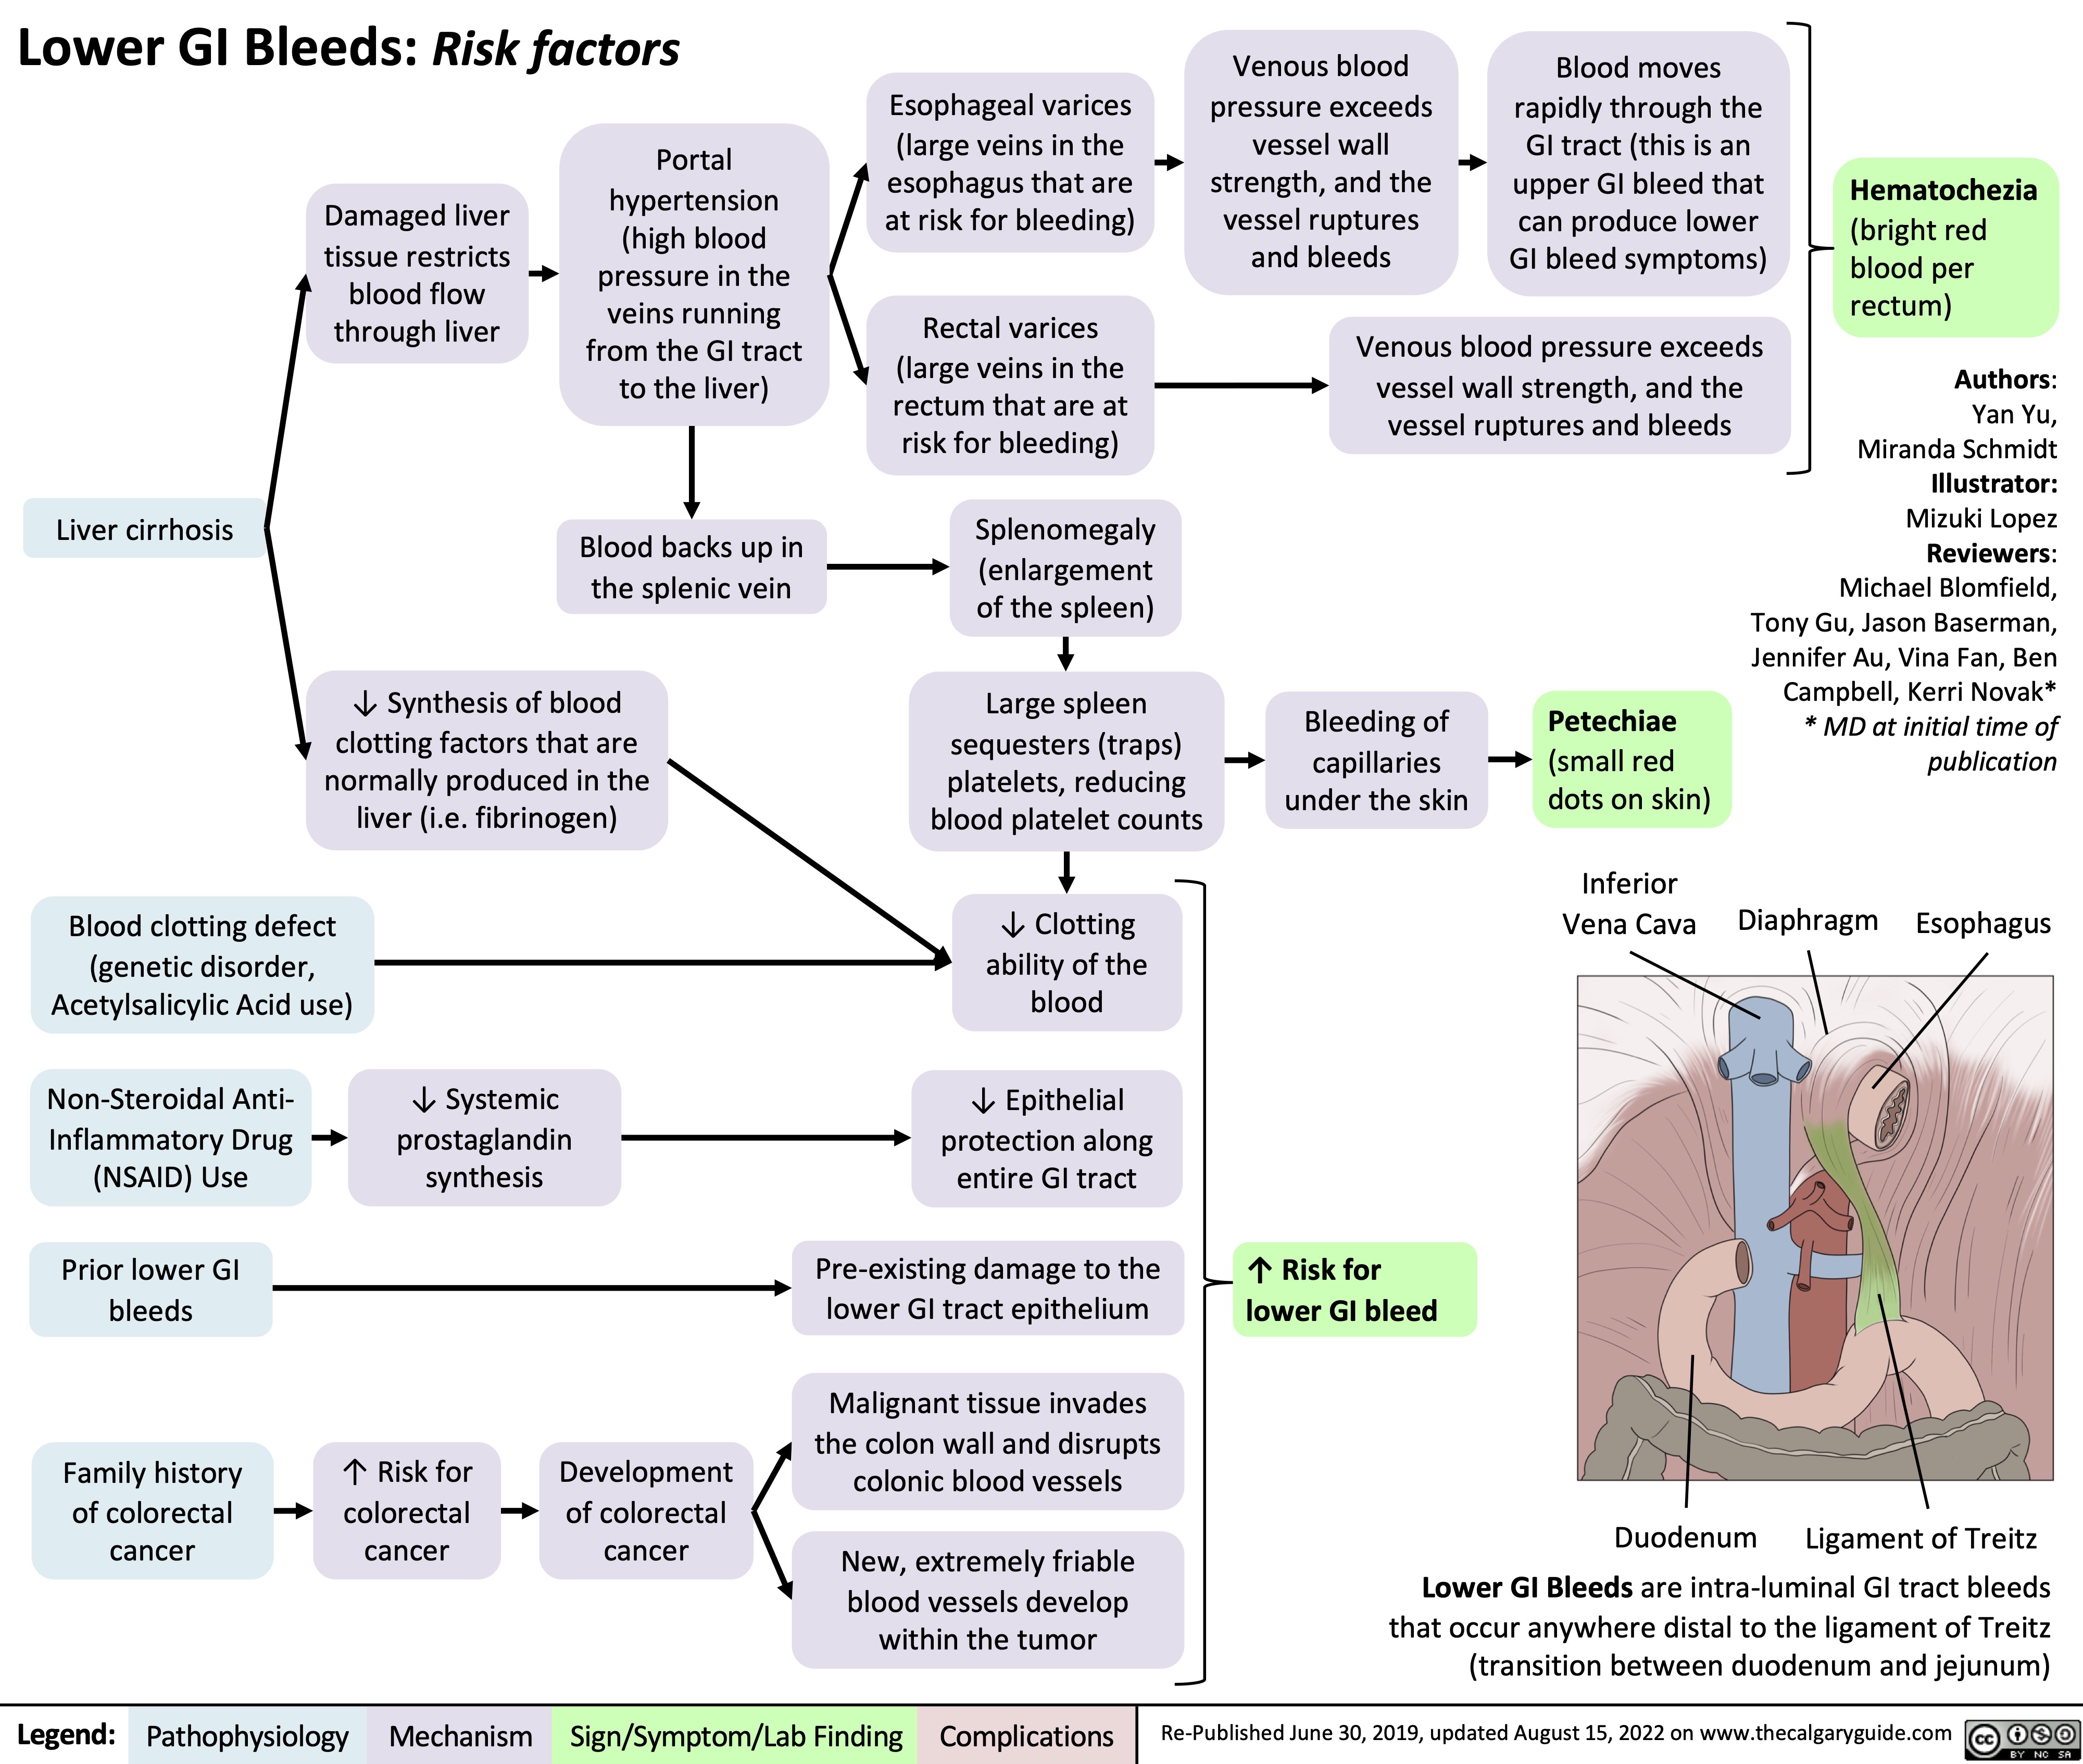 Lower GI Bleeds: Risk factors Portal
Esophageal varices (large veins in the esophagus that are at risk for bleeding)
Rectal varices (large veins in the rectum that are at risk for bleeding)
Splenomegaly (enlargement of the spleen)
Large spleen sequesters (traps) platelets, reducing blood platelet counts
↓ Clotting ability of the blood
↓ Epithelial protection along entire GI tract
Pre-existing damage to the lower GI tract epithelium
Malignant tissue invades the colon wall and disrupts colonic blood vessels
New, extremely friable blood vessels develop within the tumor
Venous blood pressure exceeds vessel wall strength, and the vessel ruptures and bleeds
Blood moves rapidly through the GI tract (this is an upper GI bleed that can produce lower GI bleed symptoms)
Hematochezia
(bright red blood per rectum)
        Damaged liver tissue restricts
blood flow through liver
hypertension (high blood pressure in the veins running from the GI tract to the liver)
Blood backs up in the splenic vein
Venous blood pressure exceeds vessel wall strength, and the vessel ruptures and bleeds
        Liver cirrhosis
Authors: Yan Yu, Miranda Schmidt Illustrator: Mizuki Lopez Reviewers: Michael Blomfield, Tony Gu, Jason Baserman, Jennifer Au, Vina Fan, Ben Campbell, Kerri Novak* * MD at initial time of publication
     ↓ Synthesis of blood clotting factors that are normally produced in the liver (i.e. fibrinogen)
Bleeding of capillaries under the skin
Petechiae
(small red dots on skin)
Inferior Vena Cava
      Blood clotting defect (genetic disorder, Acetylsalicylic Acid use)
Non-Steroidal Anti- Inflammatory Drug (NSAID) Use
Prior lower GI bleeds
Family history of colorectal cancer
Diaphragm
Esophagus
       ↓ Systemic prostaglandin synthesis
   ↑ Risk for lower GI bleed
       ↑ Risk for colorectal cancer
Development of colorectal cancer
Duodenum
Ligament of Treitz
  Lower GI Bleeds are intra-luminal GI tract bleeds that occur anywhere distal to the ligament of Treitz (transition between duodenum and jejunum)
 Legend:
 Pathophysiology
Mechanism
Sign/Symptom/Lab Finding
 Complications
Re-Published June 30, 2019, updated August 15, 2022 on www.thecalgaryguide.com
    